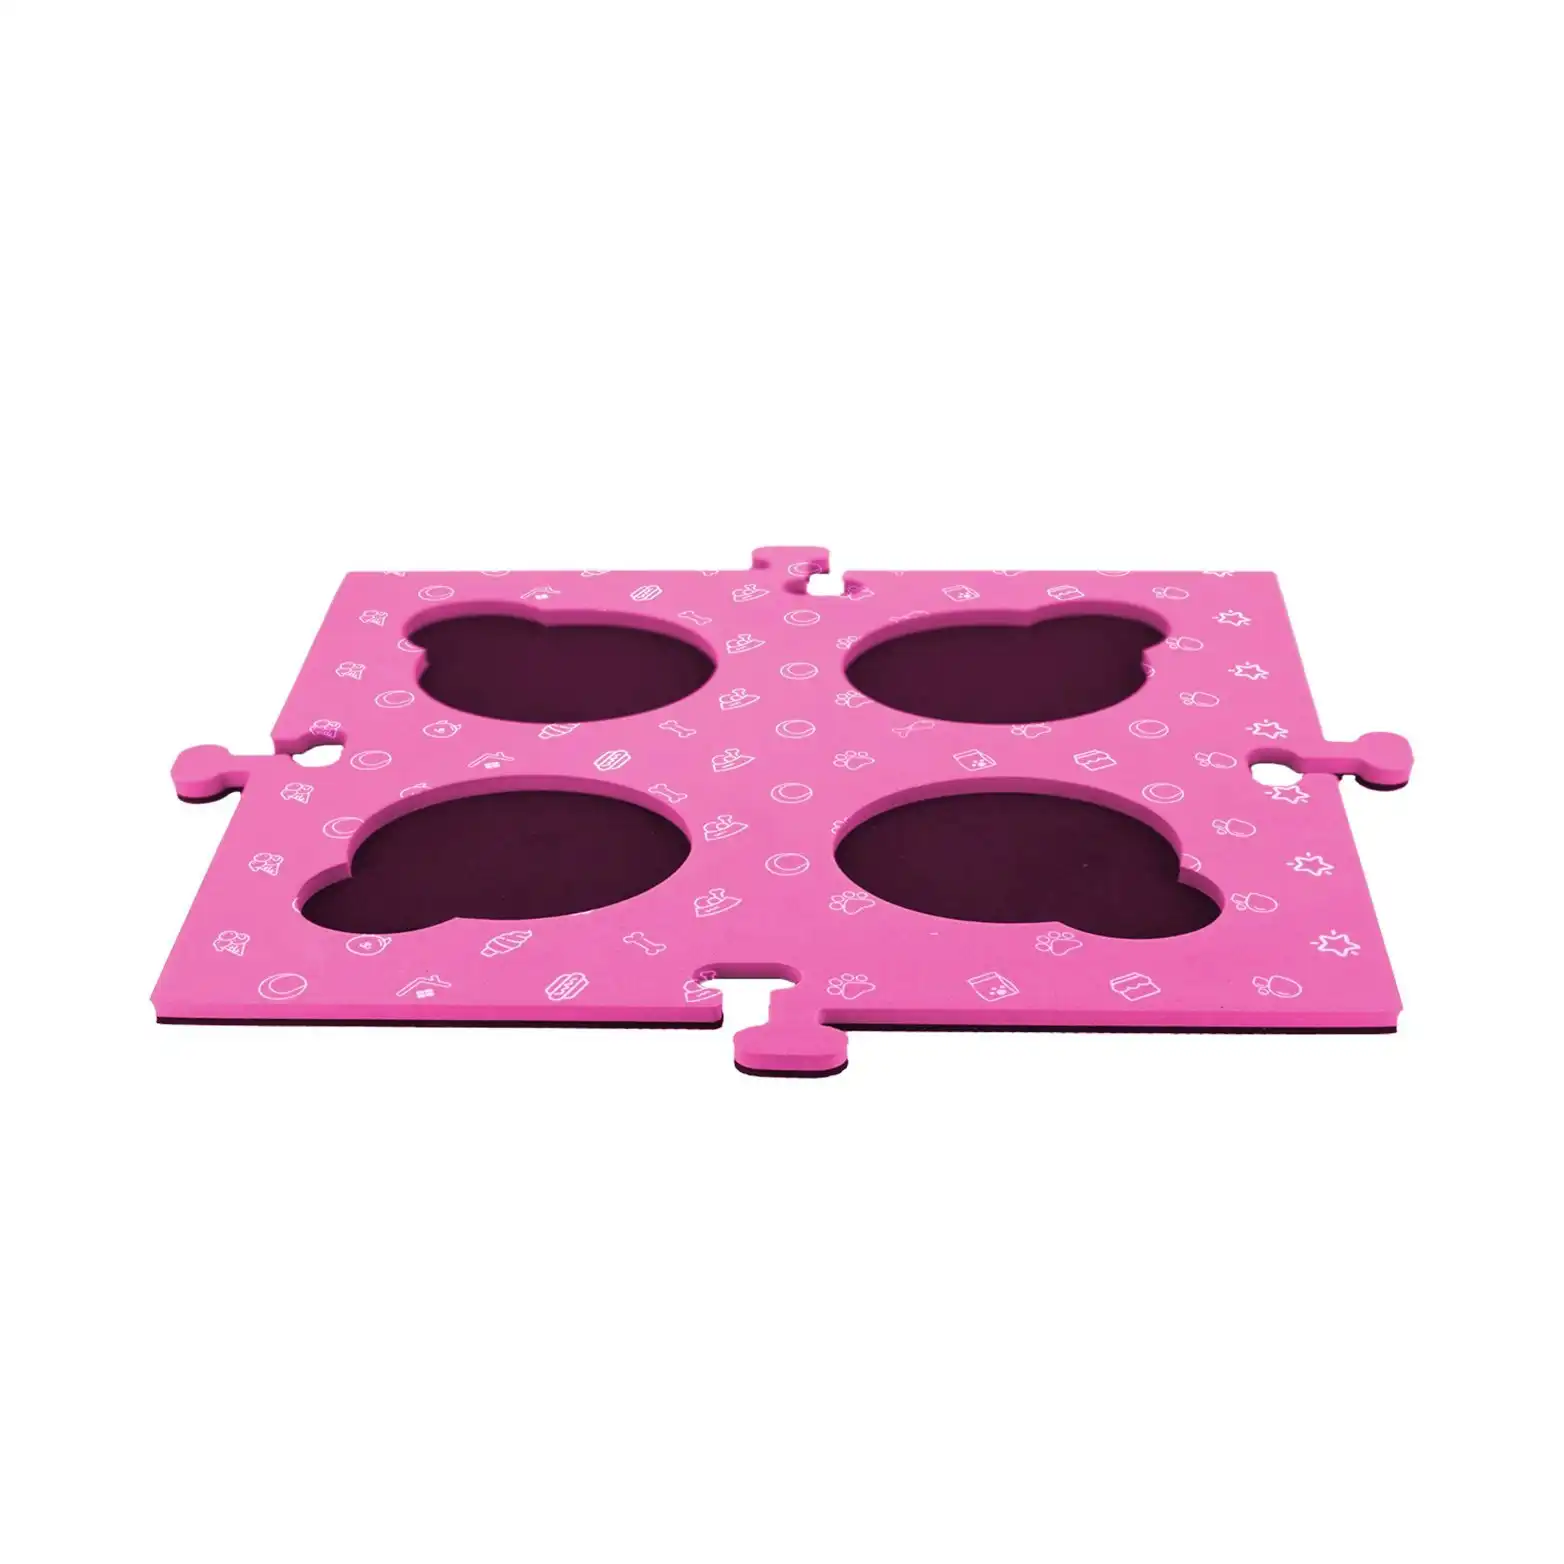 Tech4Pets Pink 2-Pack Talking Button Mat - Floor Protection